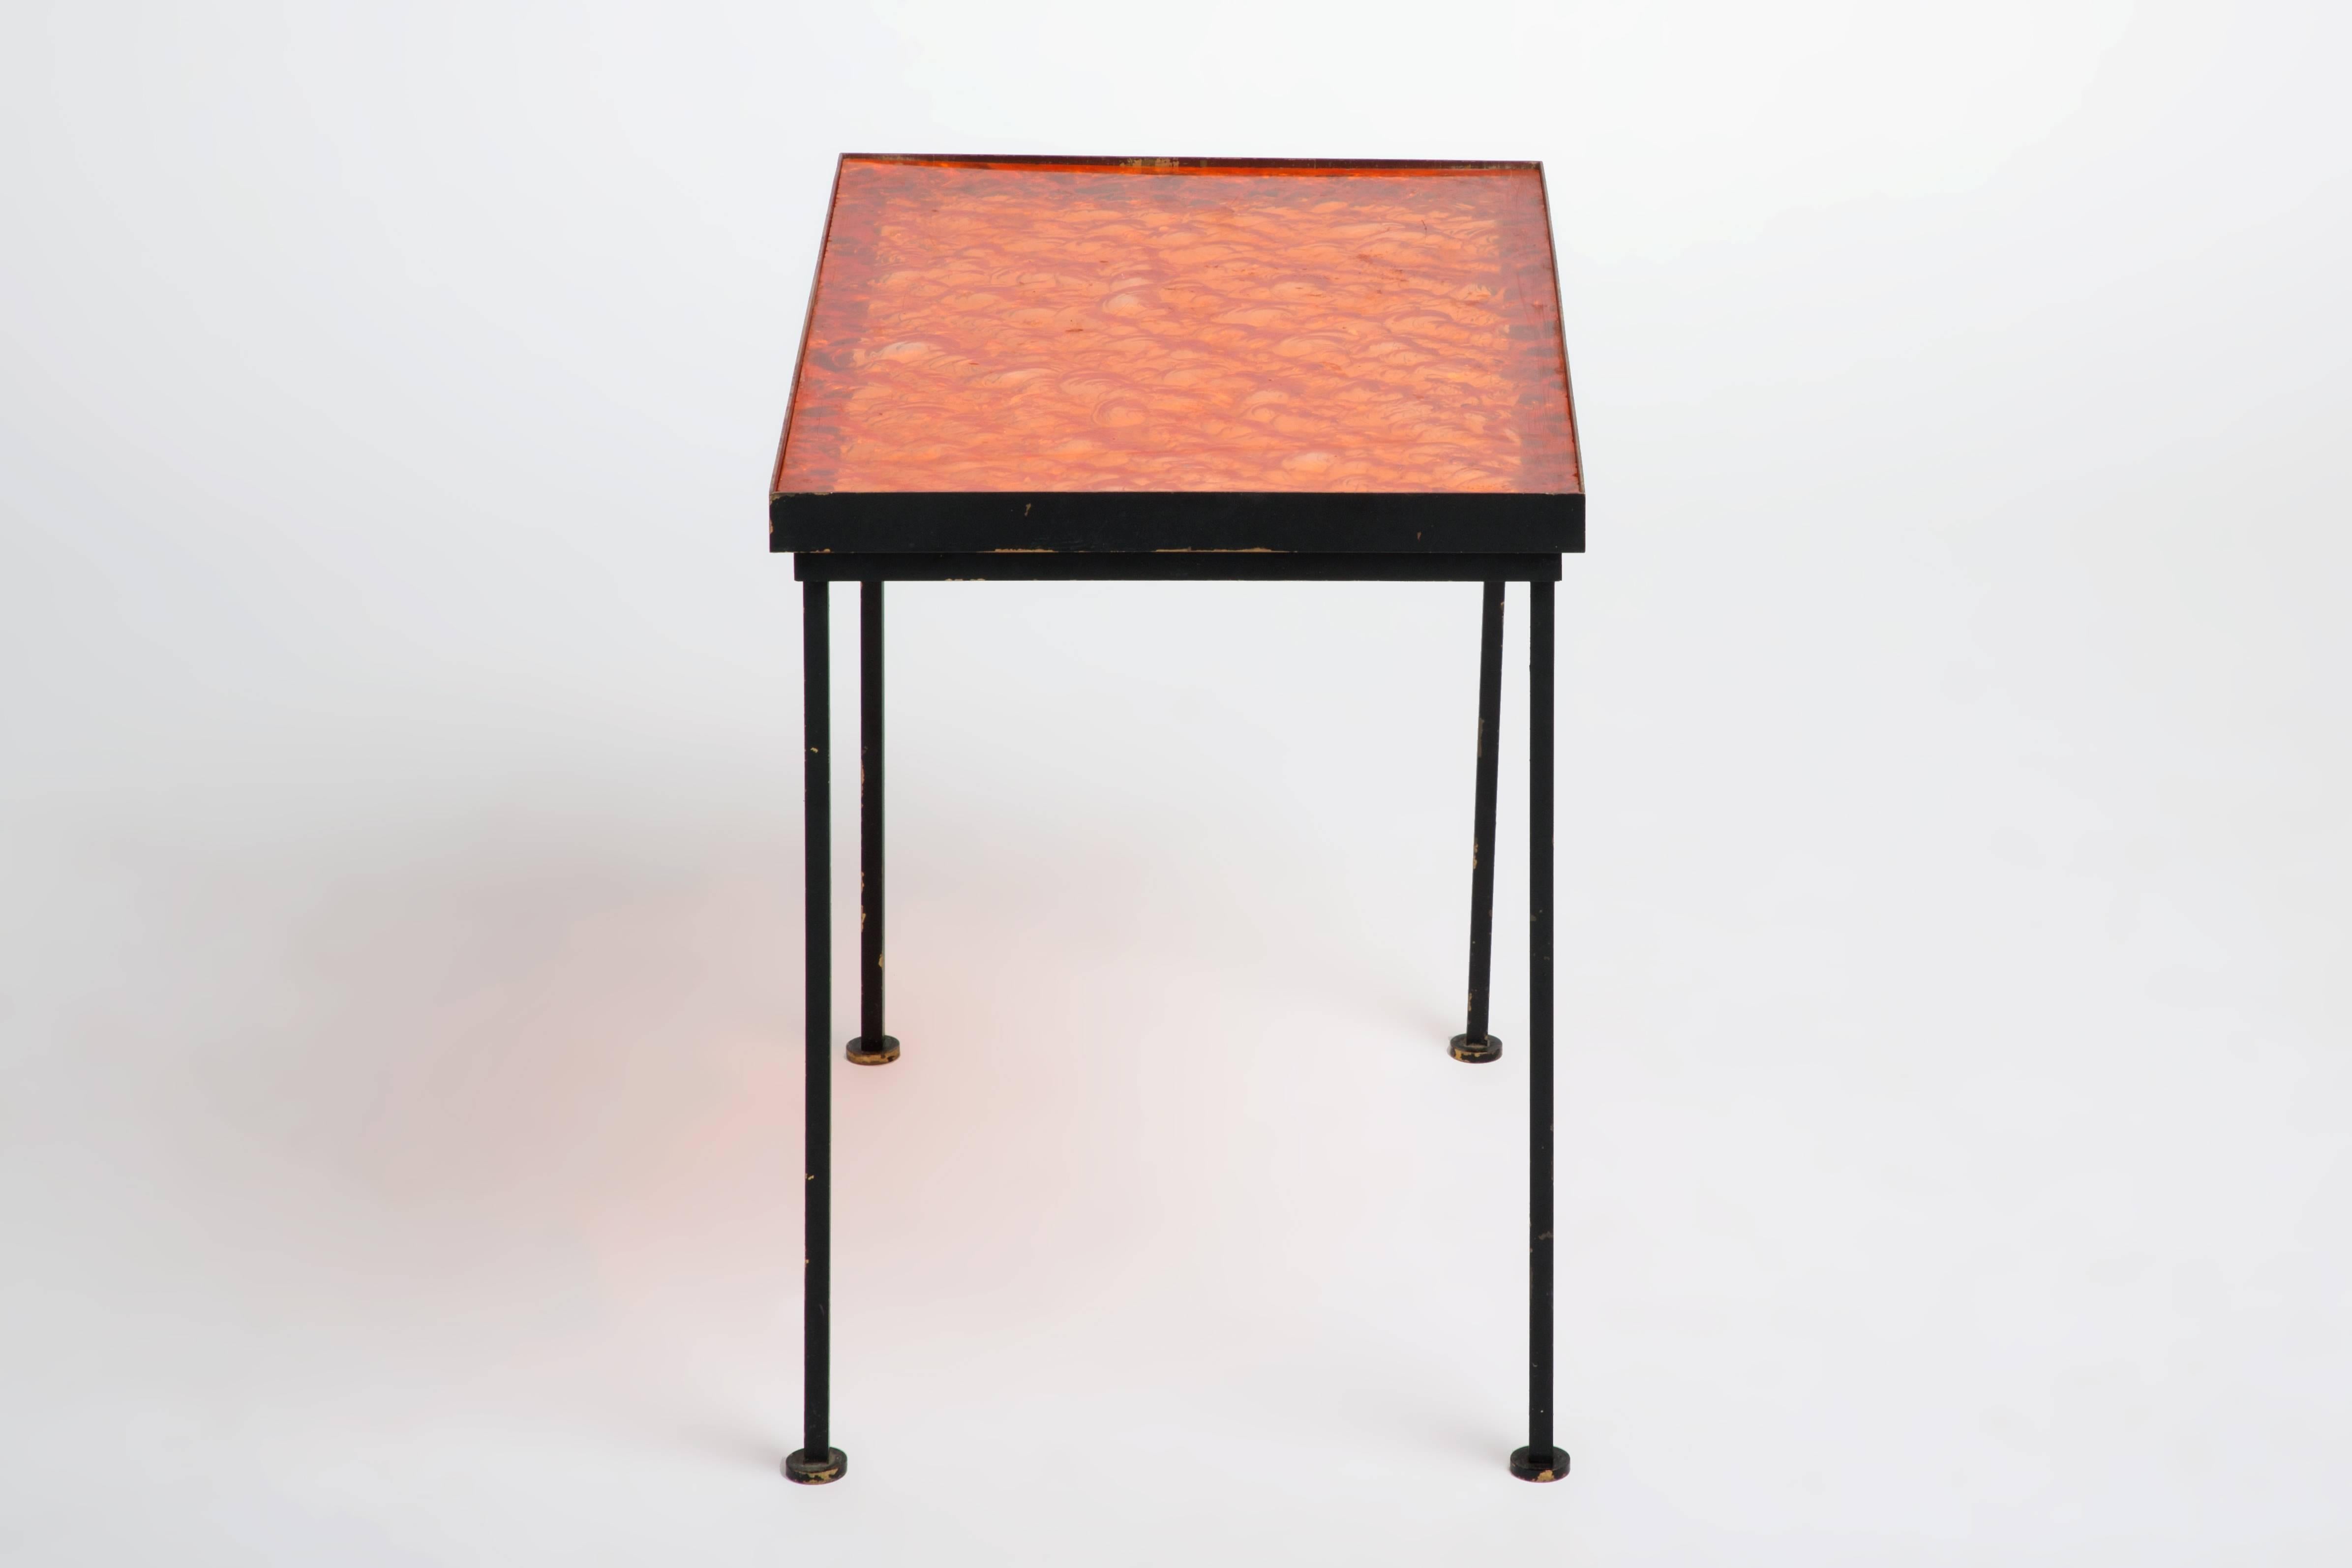 This side table is in excellent condition with a beautifully crafted orange resin top.